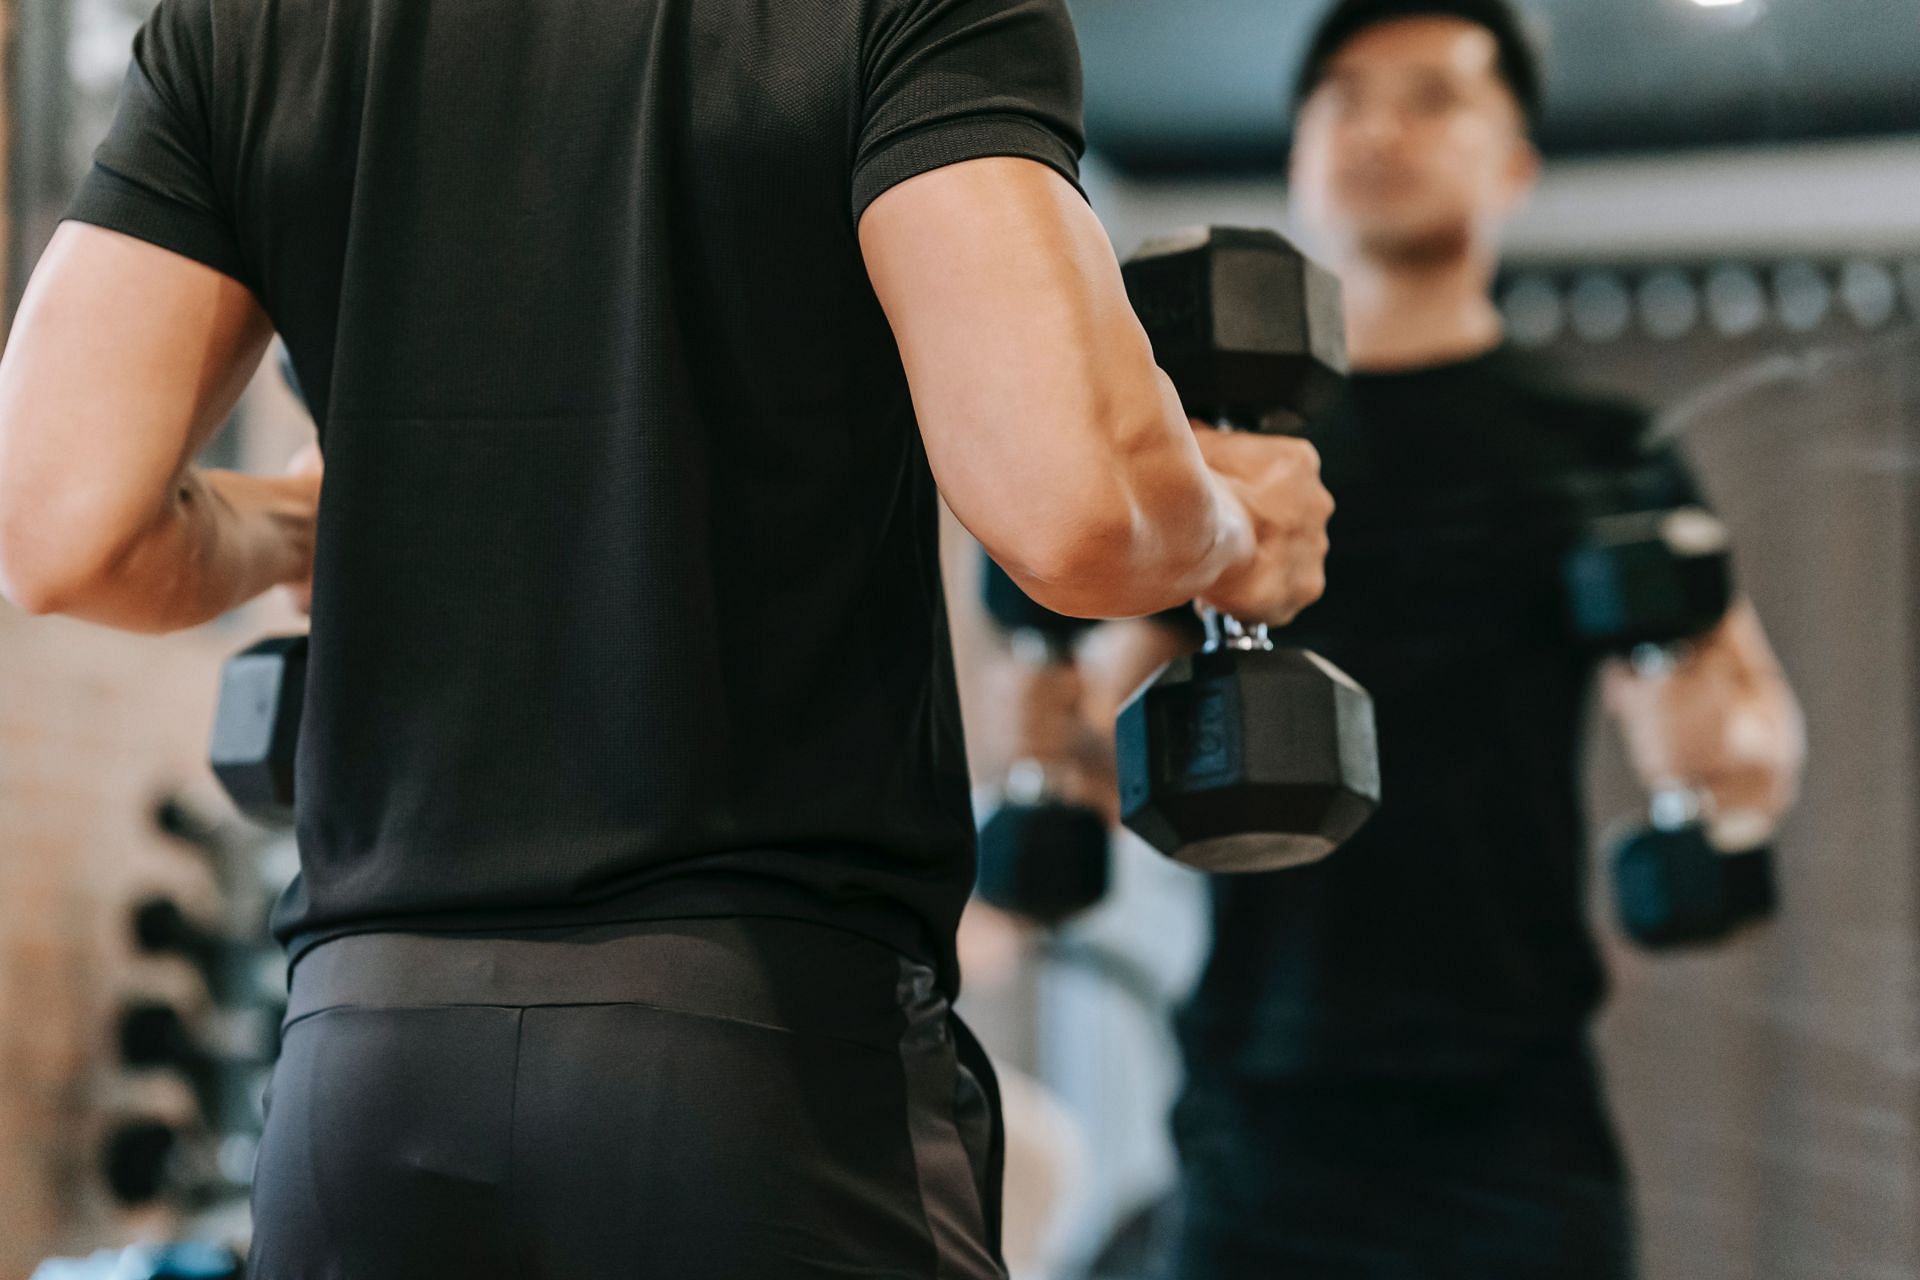 Hammer curls are a great arm workout for your biceps!  (Image via Pexels / Andres Ayrton)